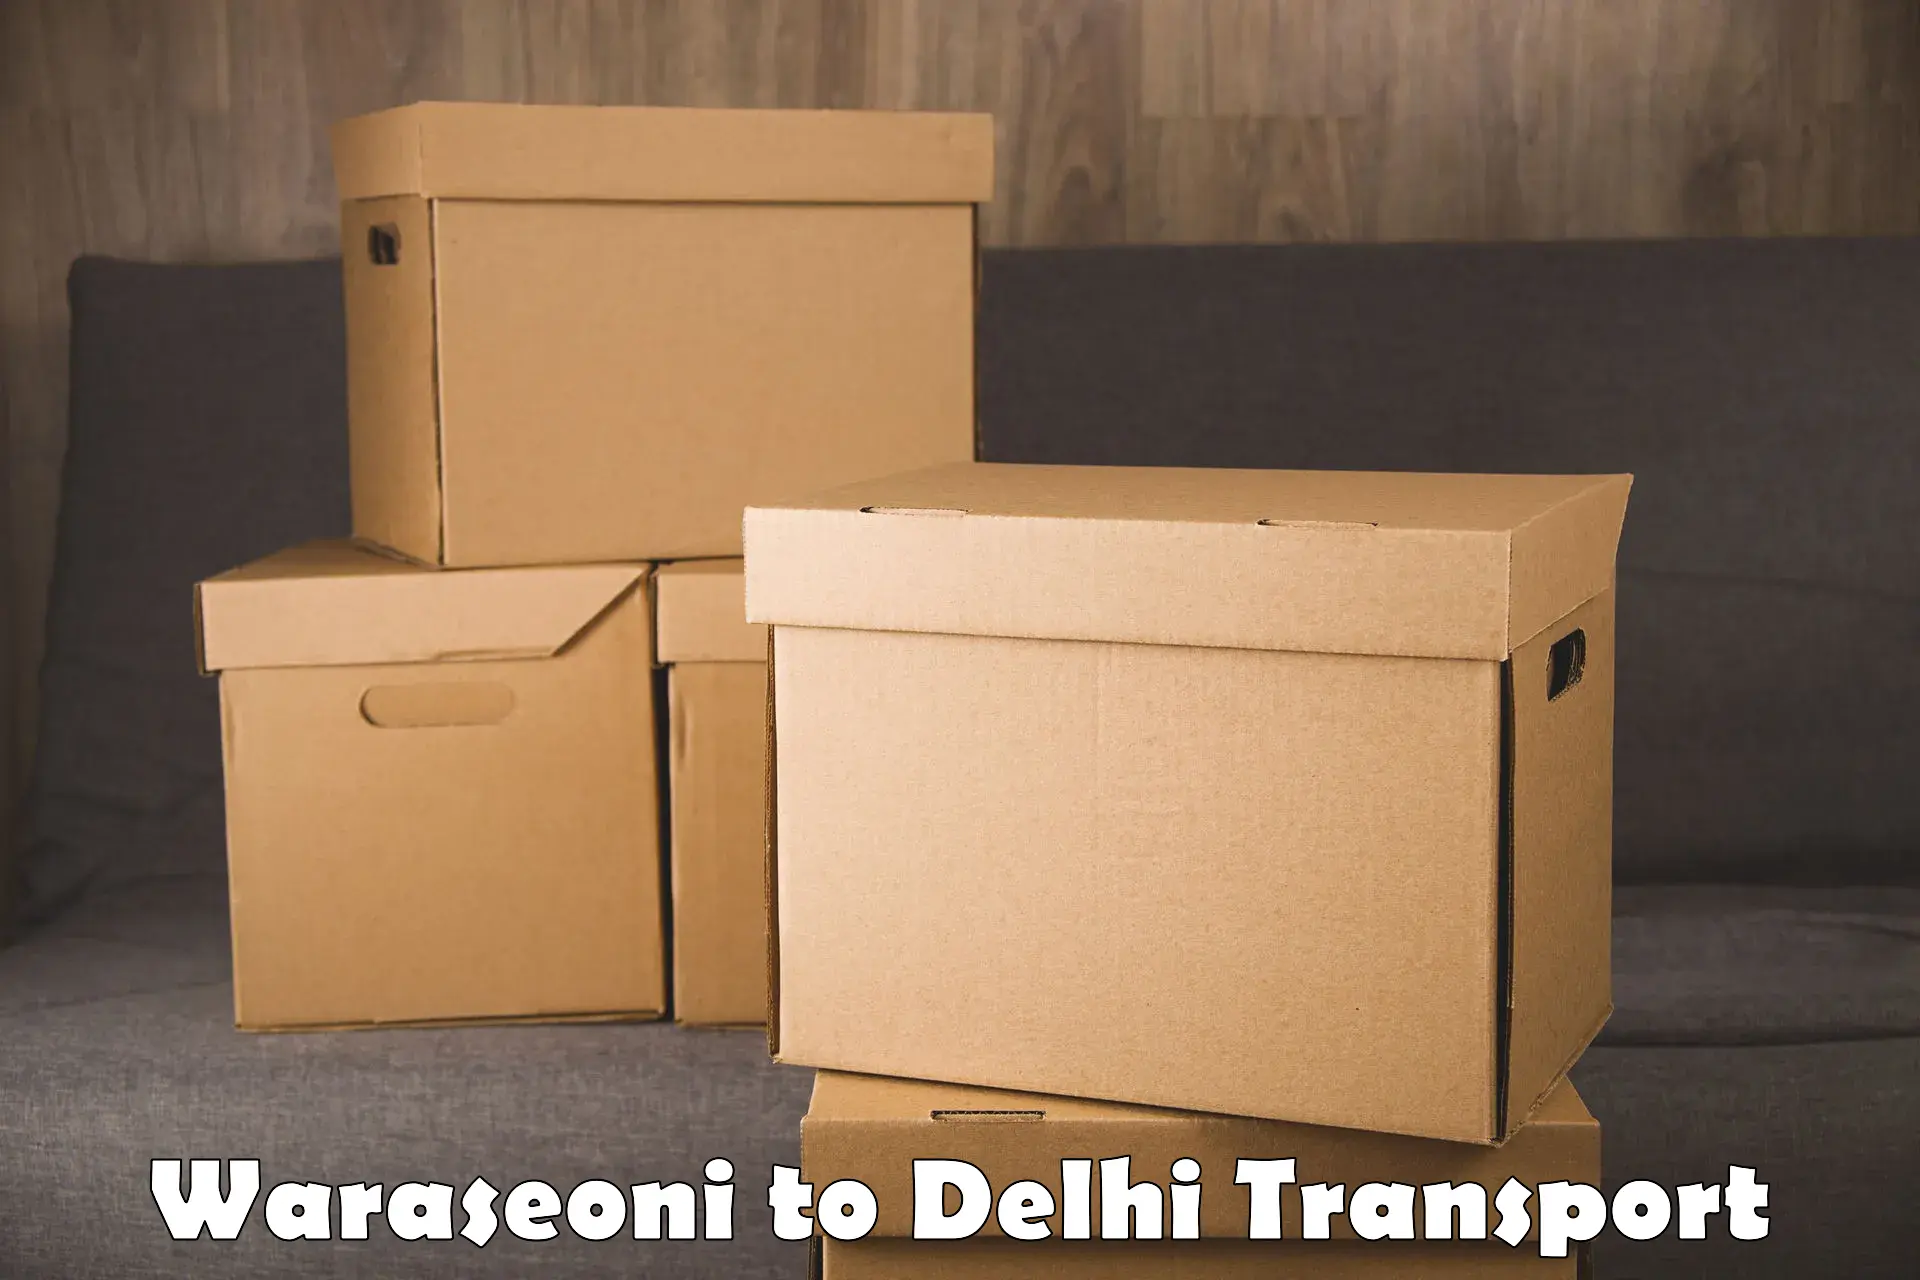 Truck transport companies in India Waraseoni to NCR